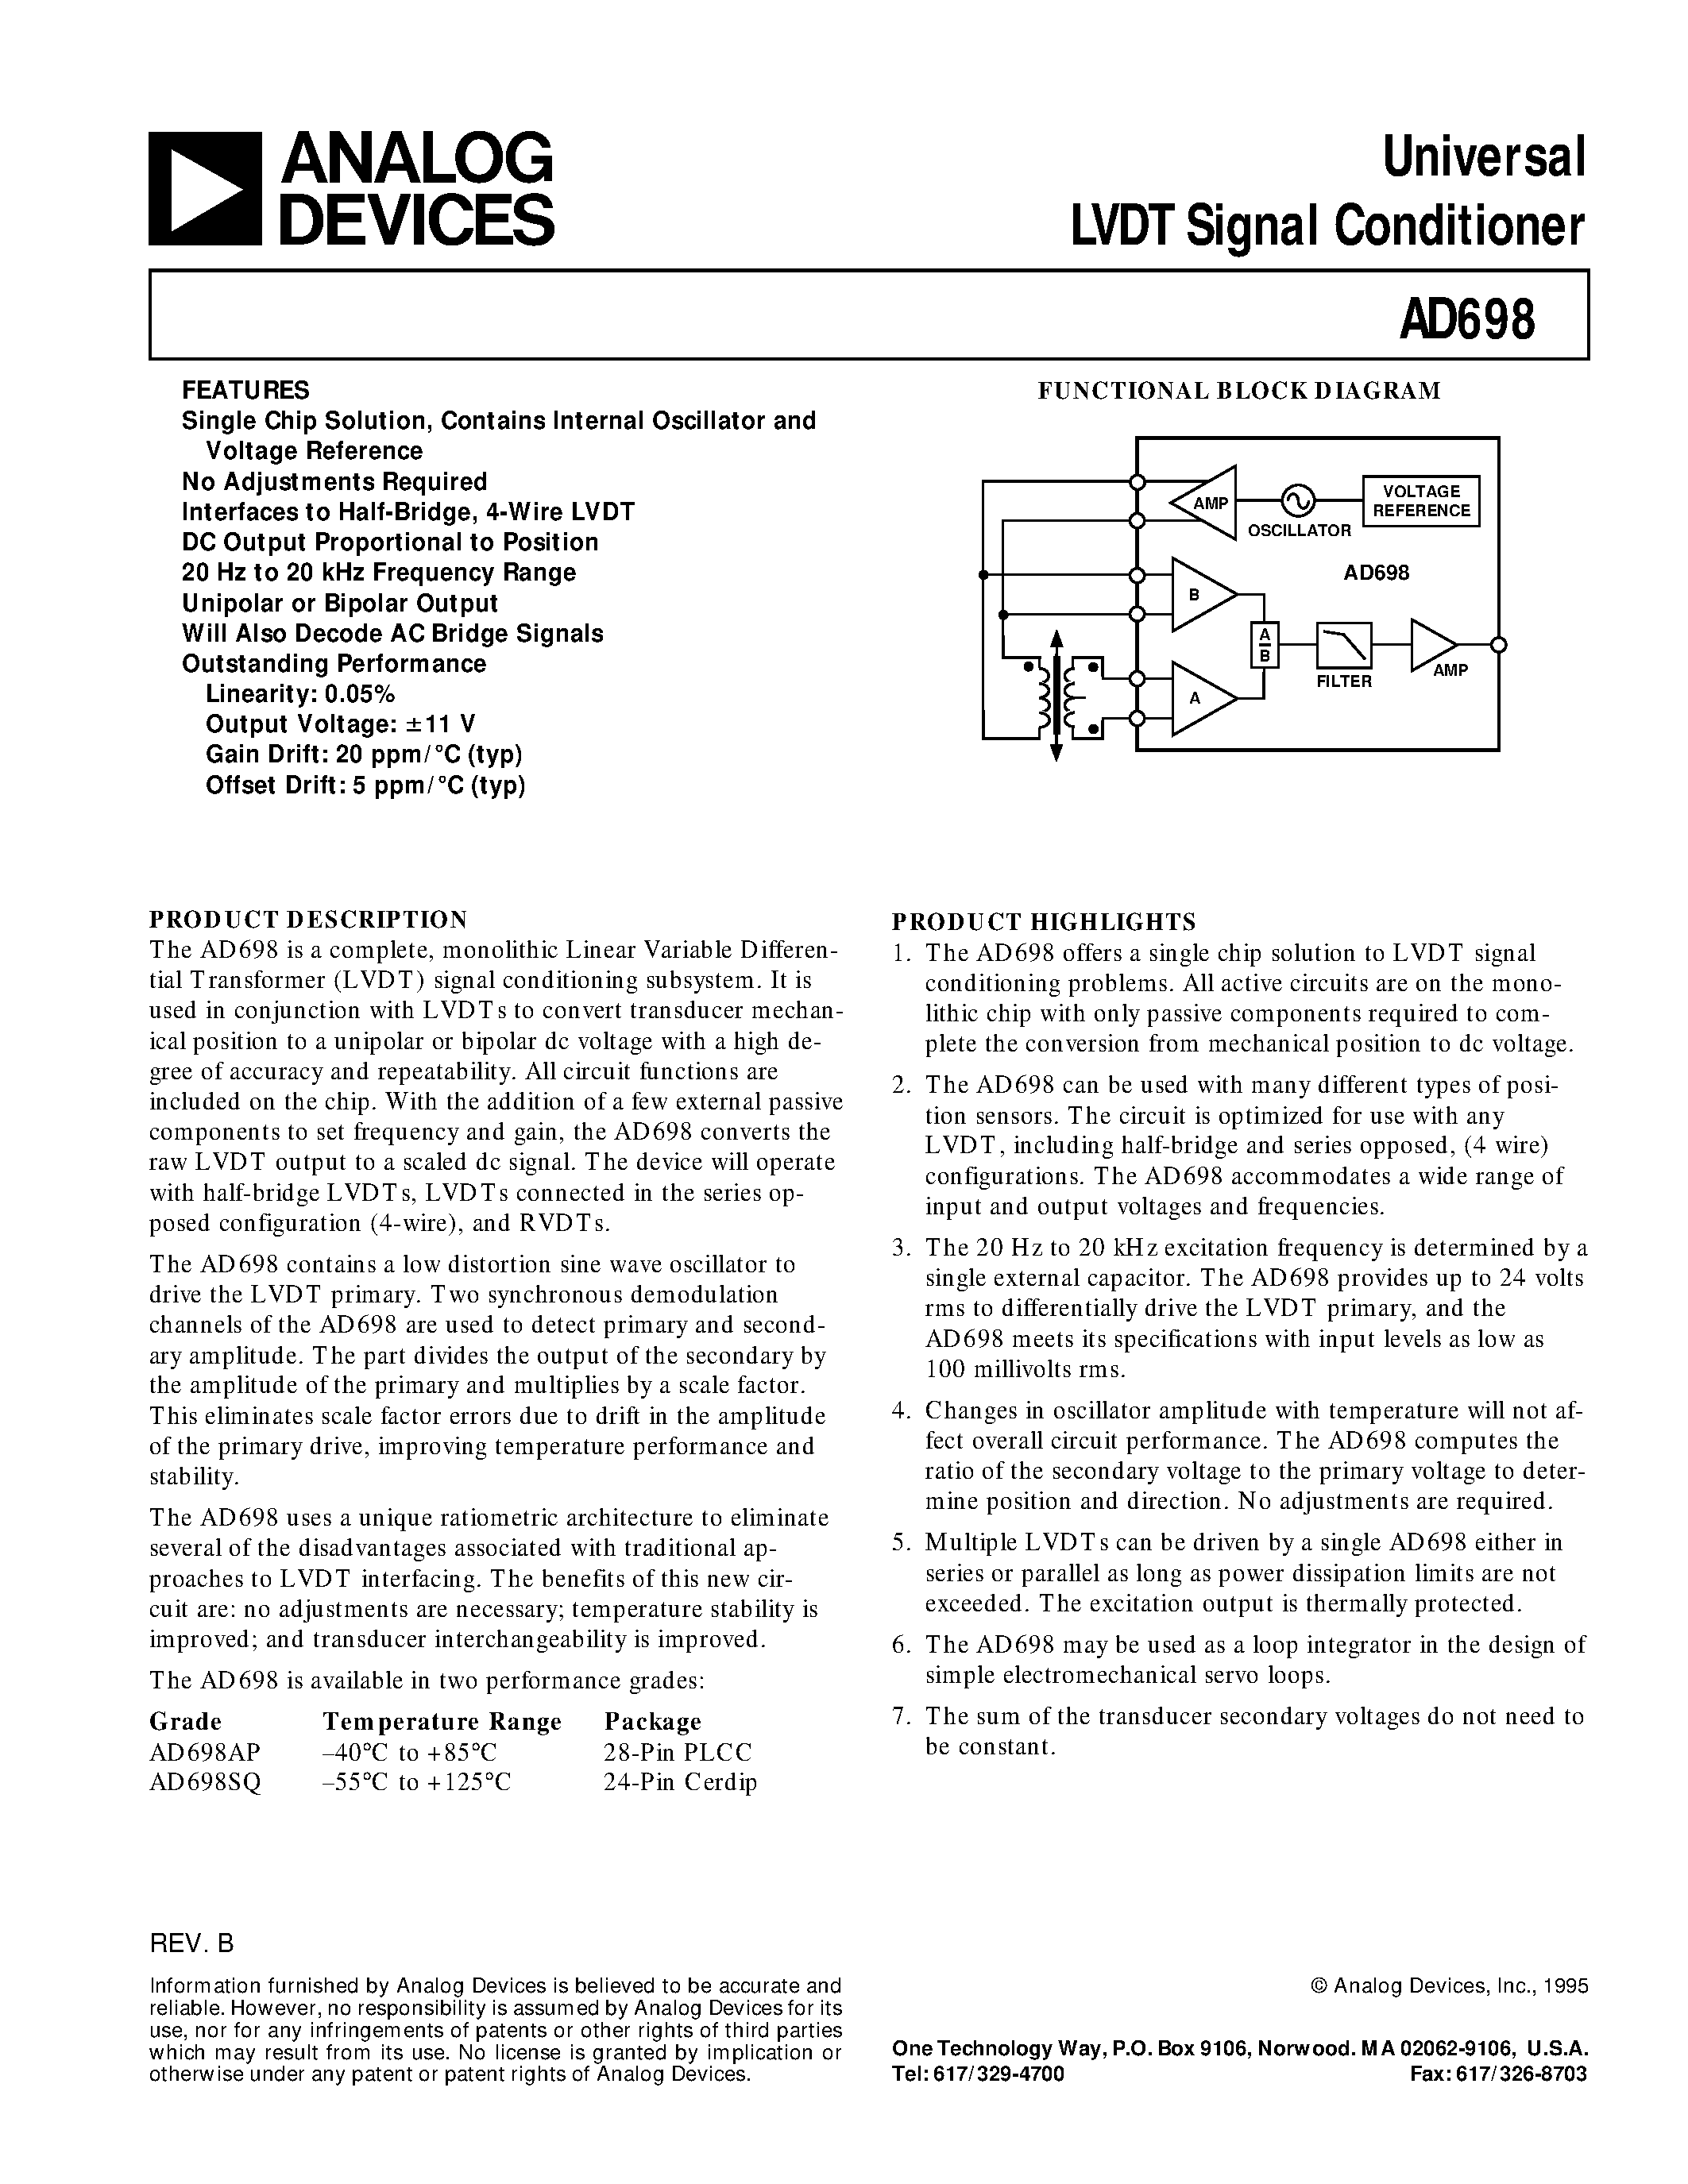 Datasheet AD698SQ - Universal LVDT Signal Conditioner page 1